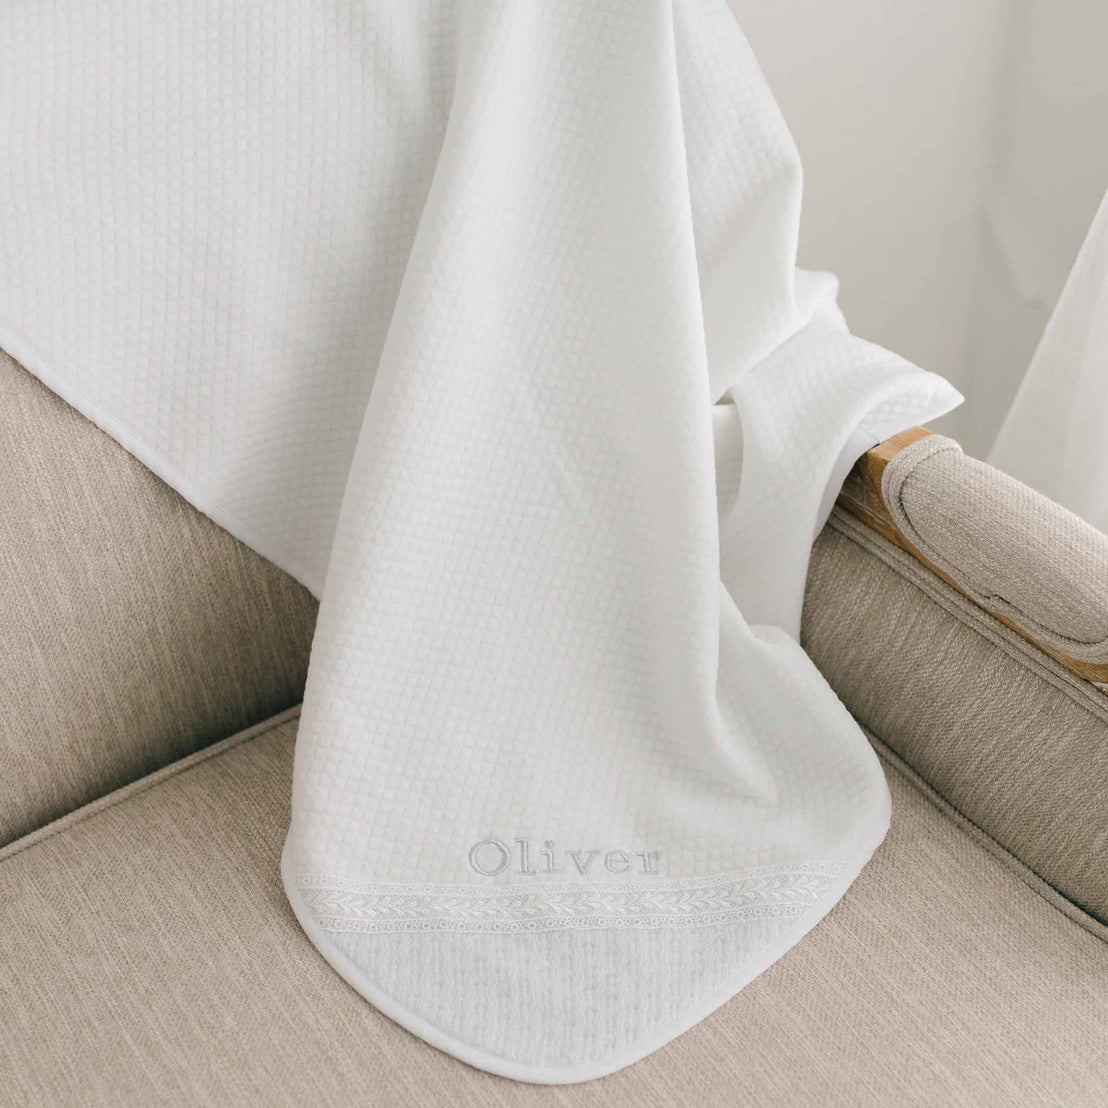 A white Oliver Personalized Blanket drapes over the arm and seat of a light beige chair. The embroidery includes the name "Oliver" and intricate, leafy patterns along the corner of the blanket.